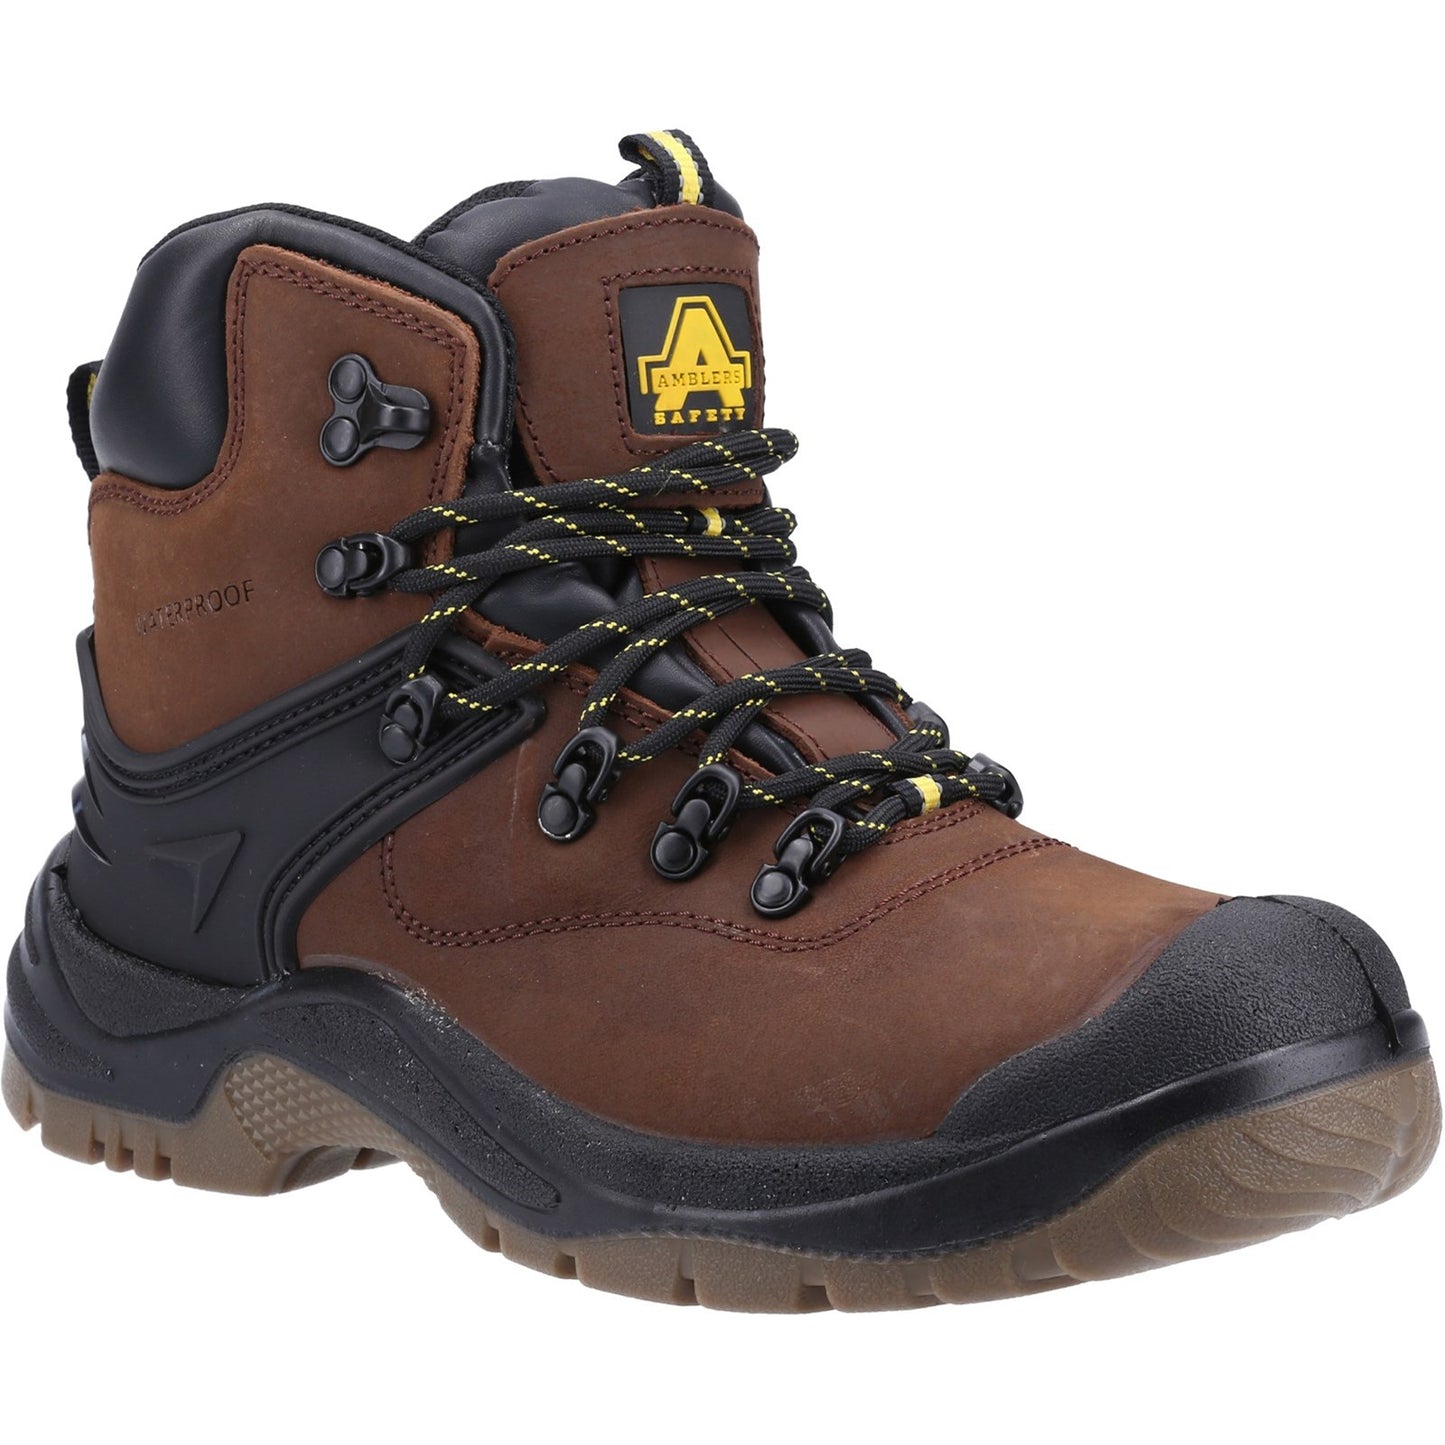 FS197 Safety Boot, Amblers Safety